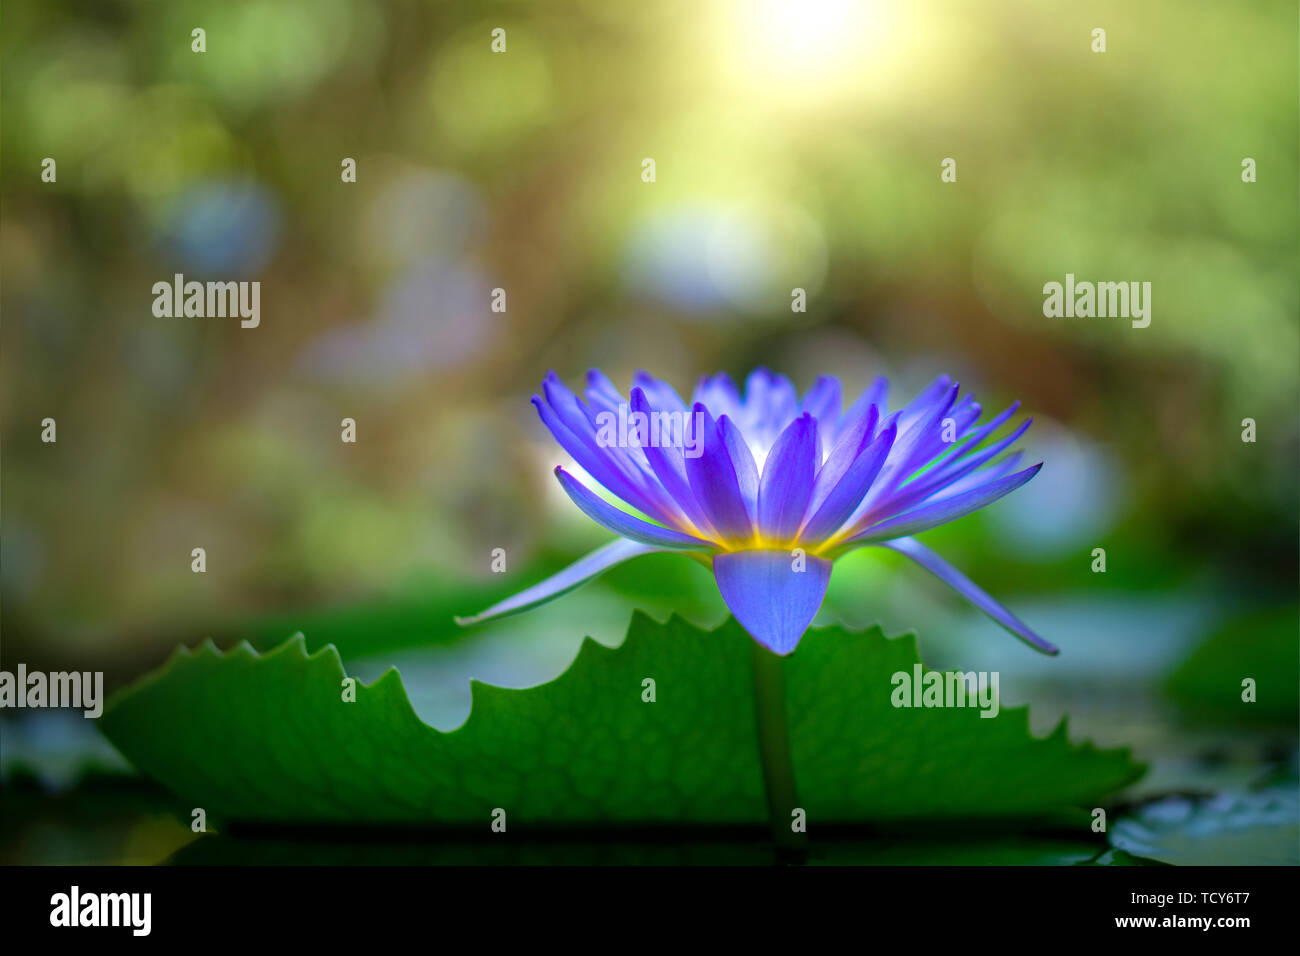 Violet thai water lily or lotus flower. Stock Photo